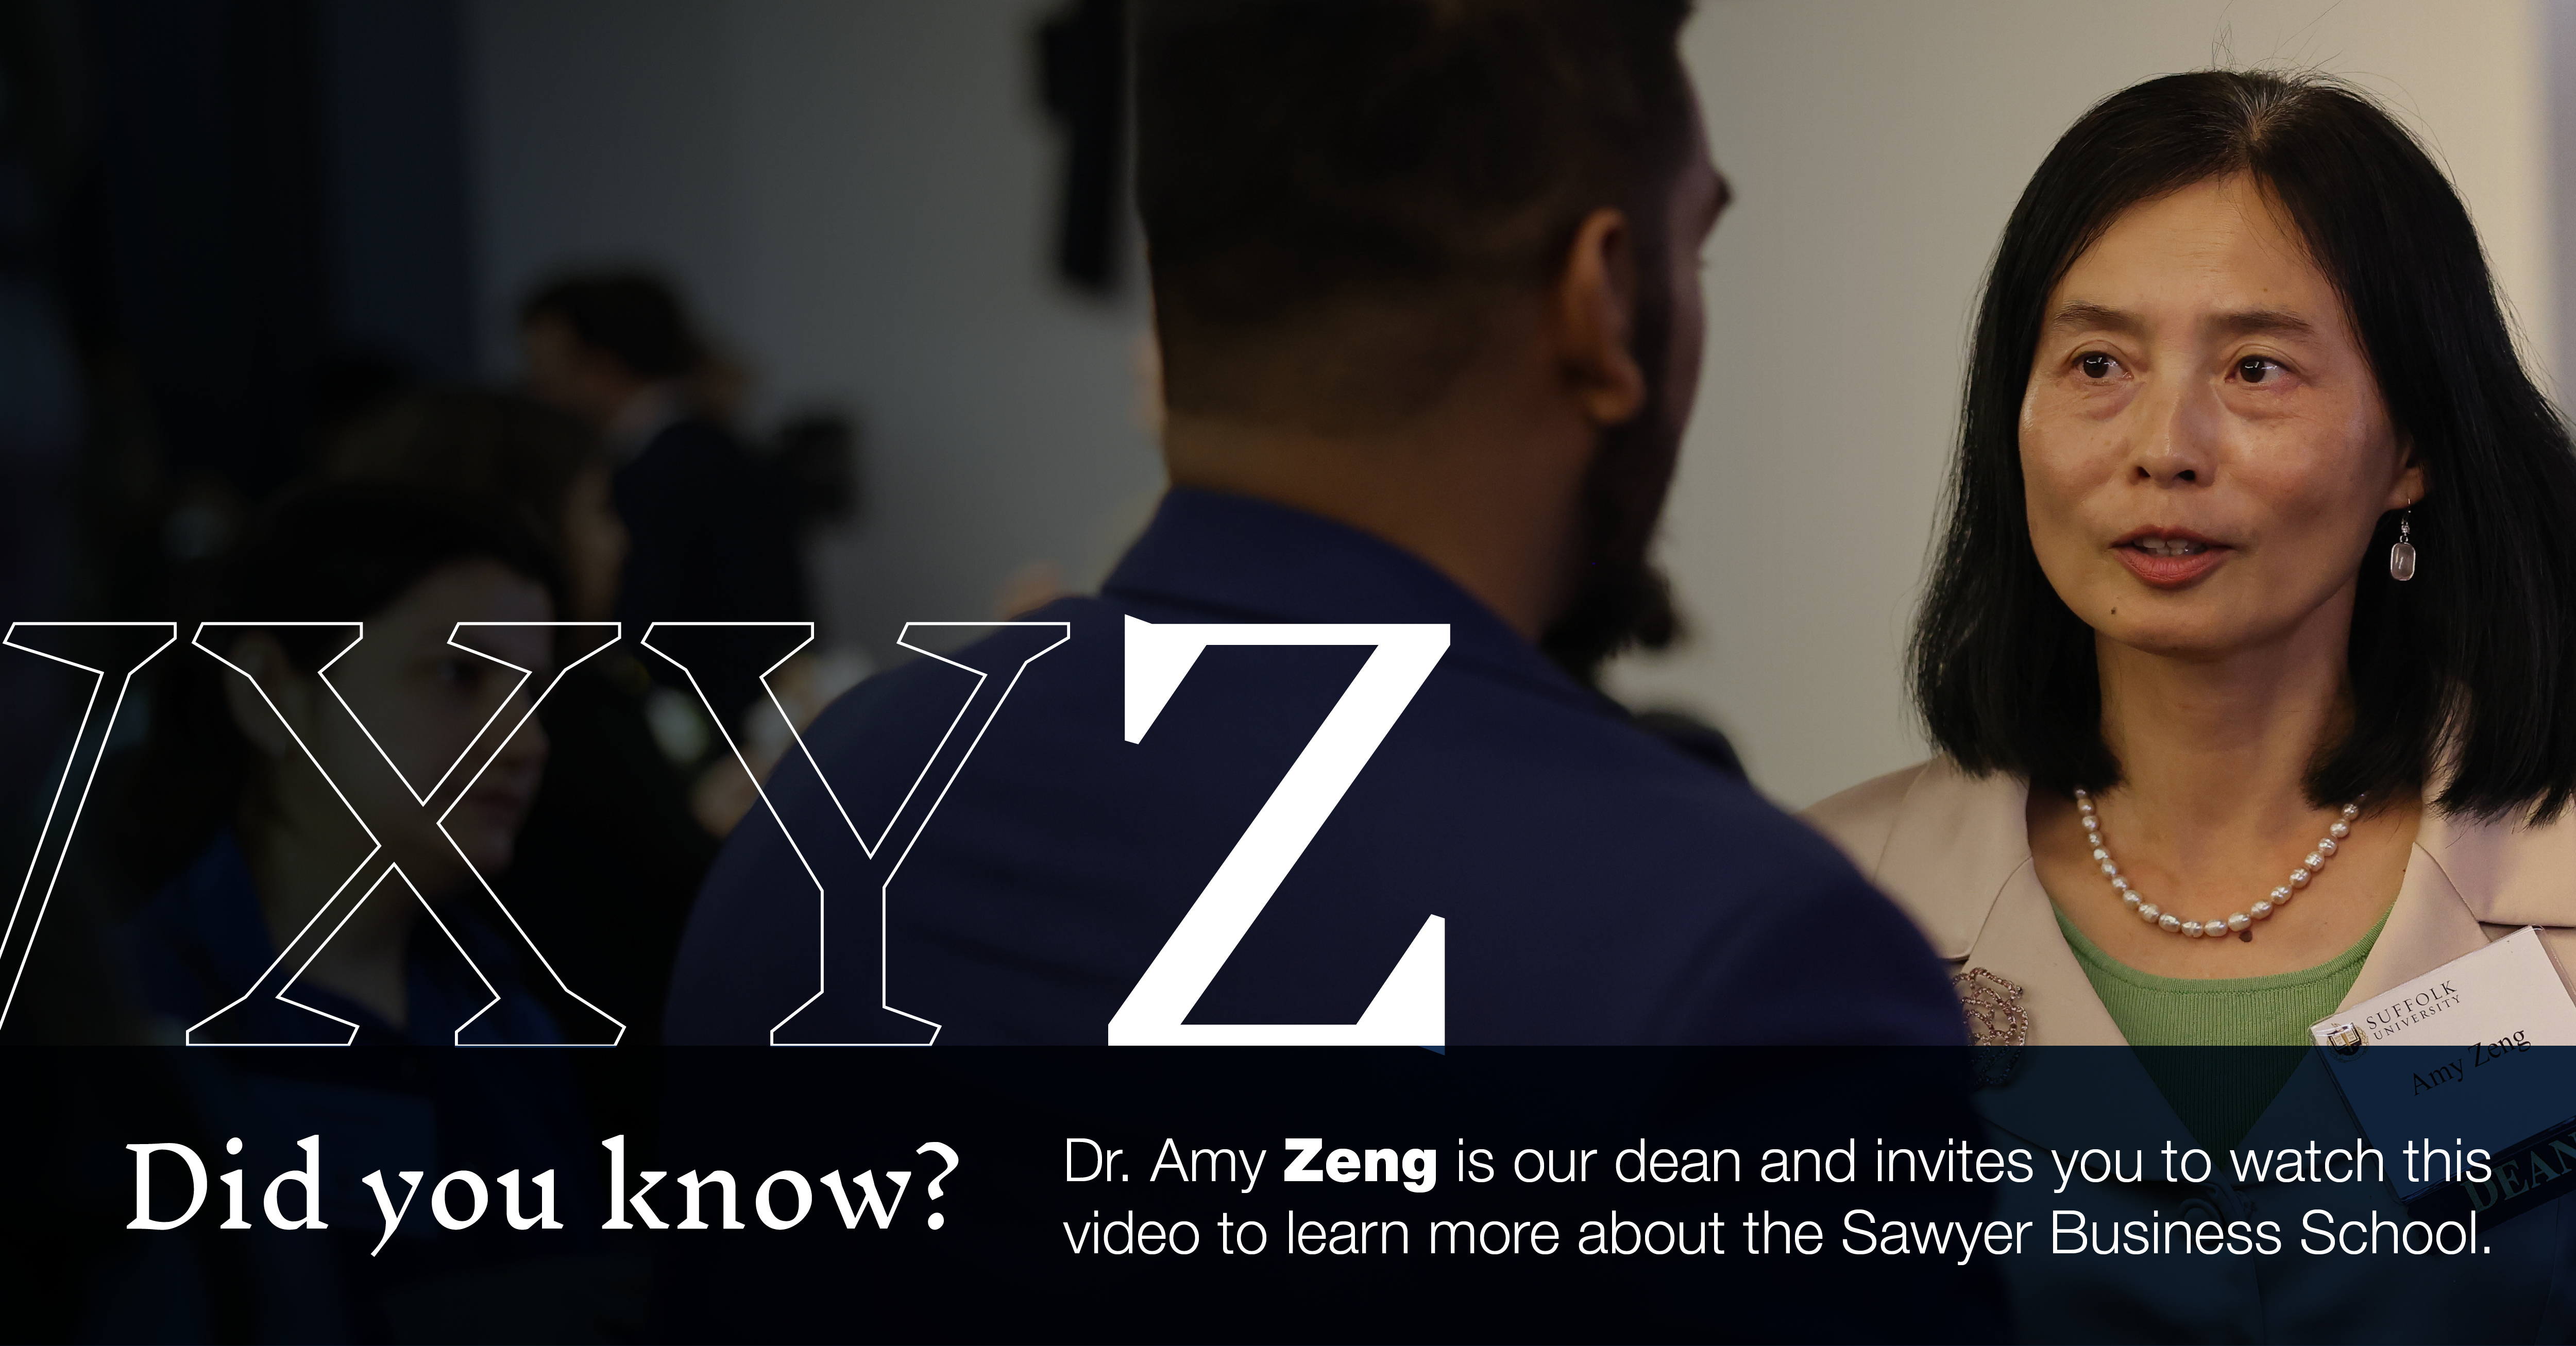 Z: [image of Dean Zeng talking to a student] Did you know that Dr. Amy Zeng is our dean and invites you to watch this video to learn more about the Sawyer Business School